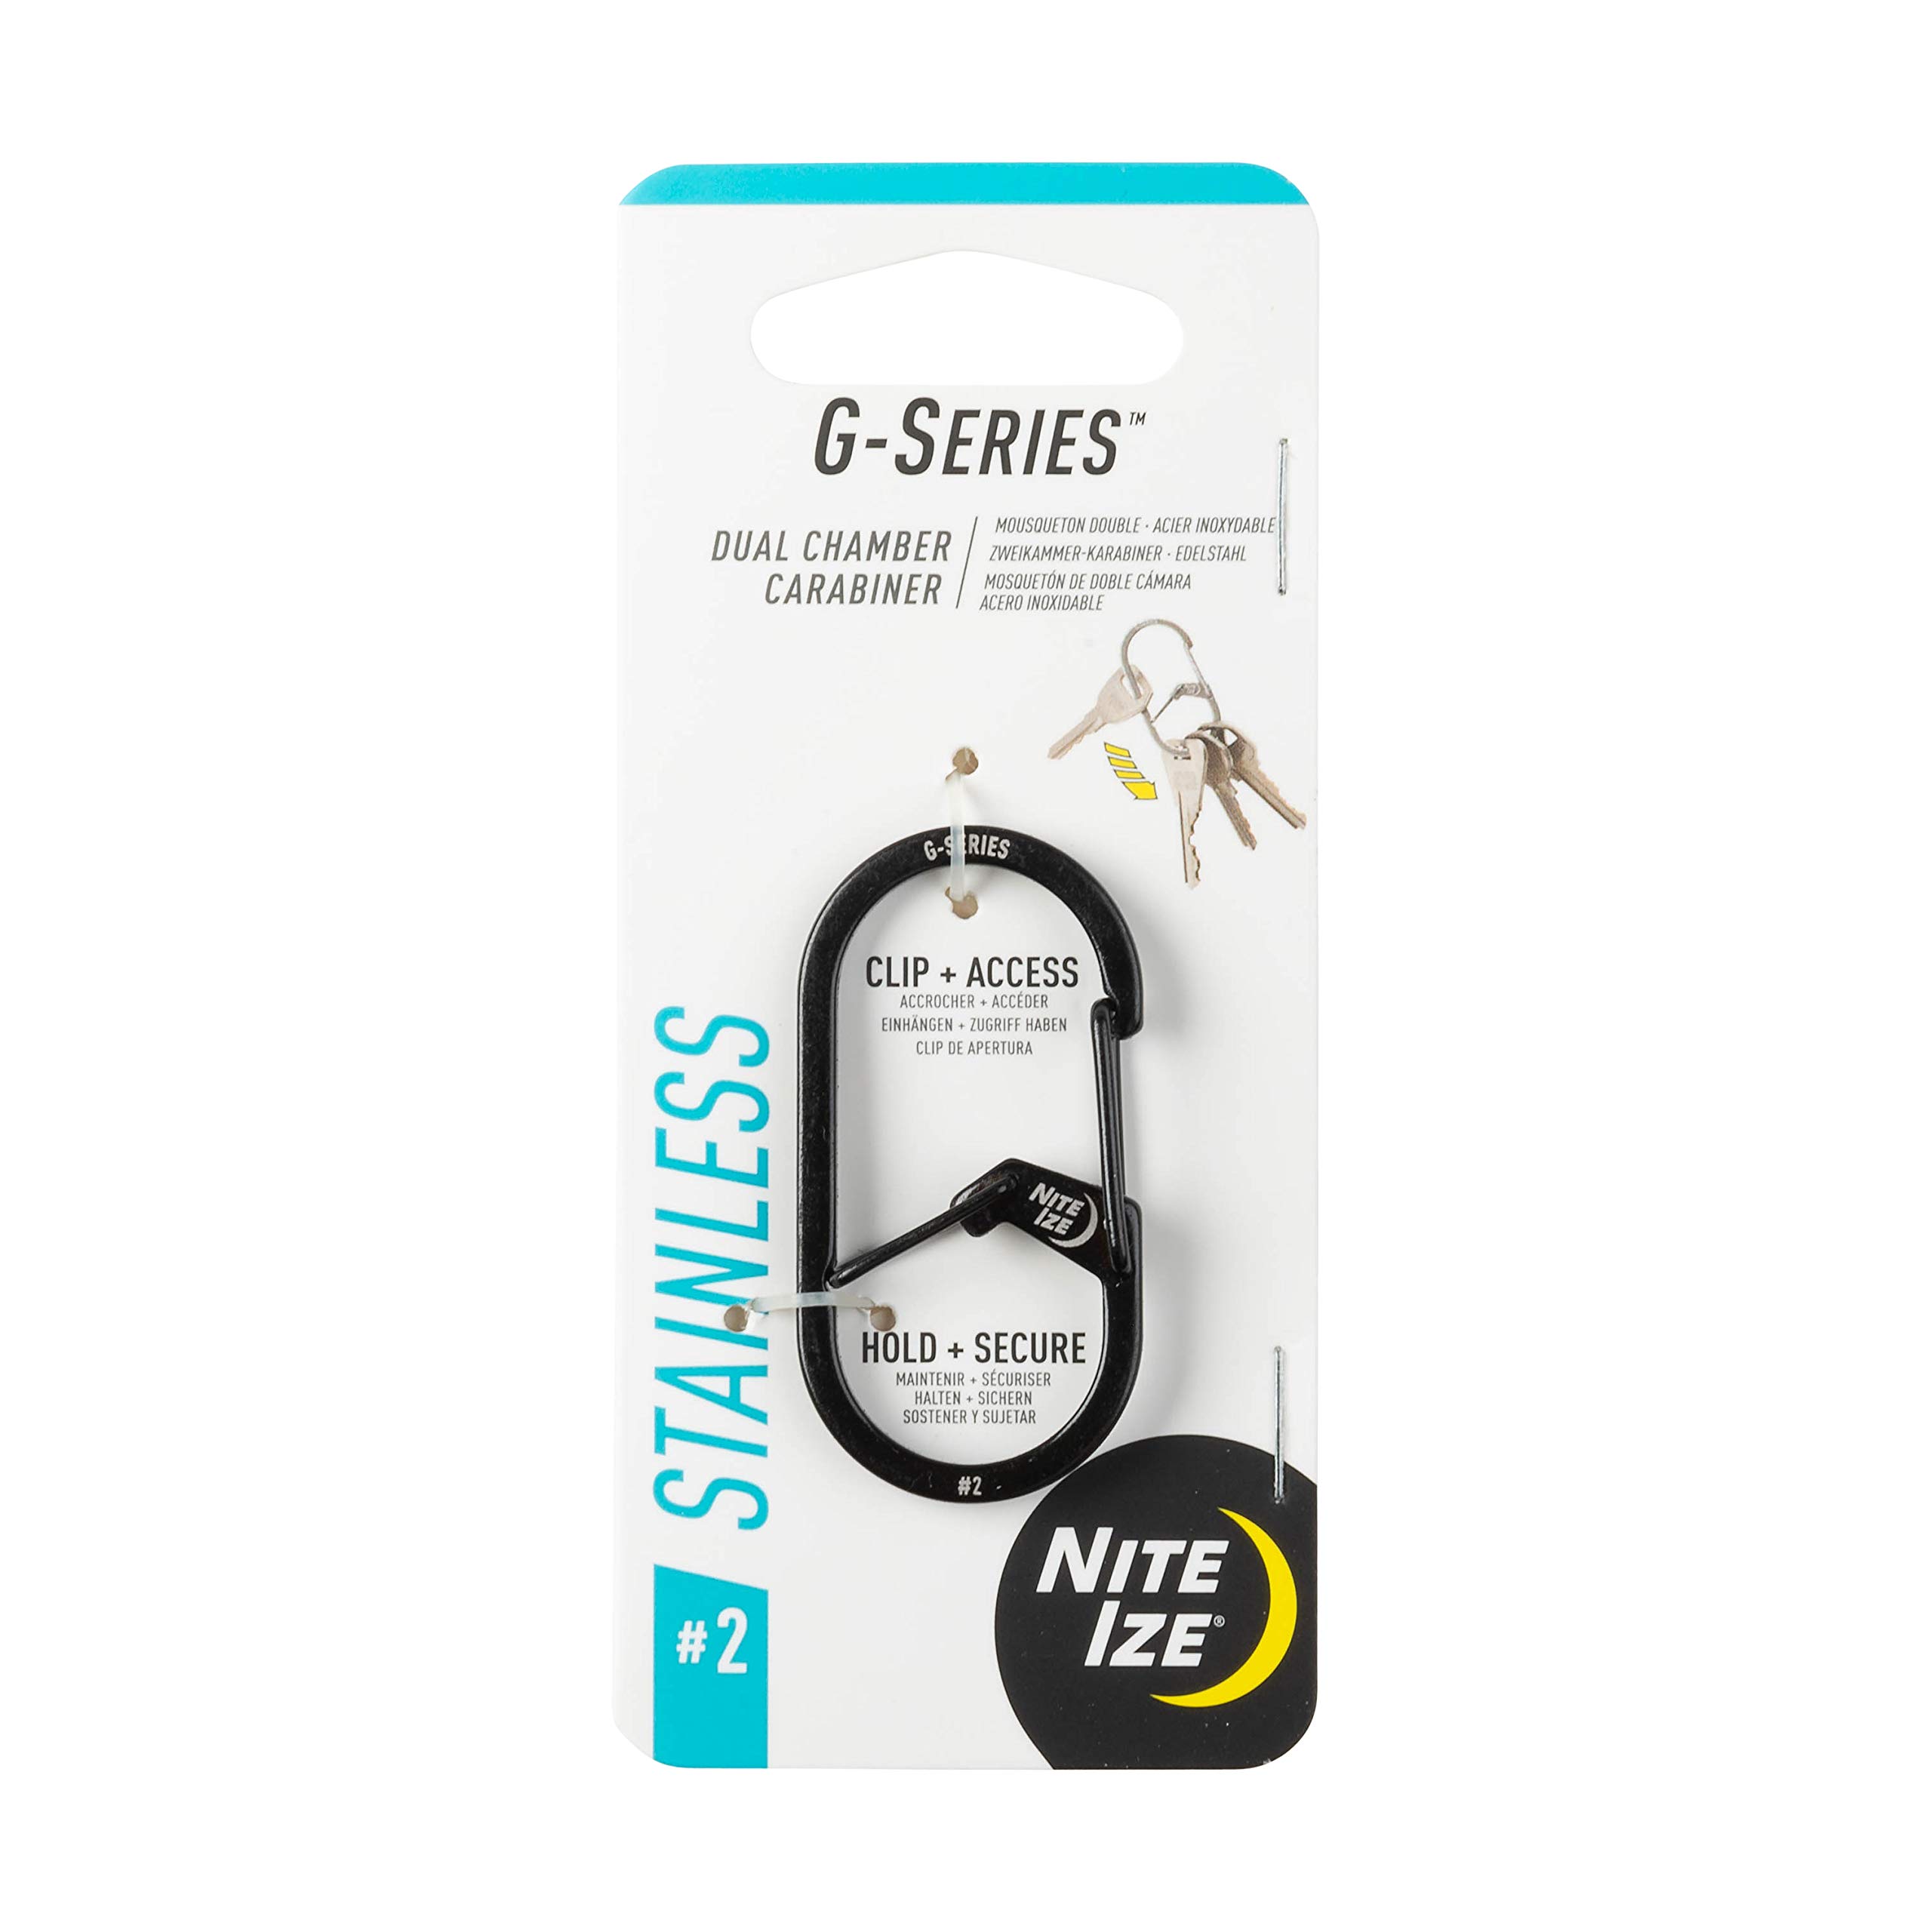 Nite Ize GS2-01-R6 G Series Dual Carabiner, 2 Inch Overall Length,  Stainless Steel, Black: Carabiners, Pull Apart Keyrings & Snap Rings  (094664050693-1)